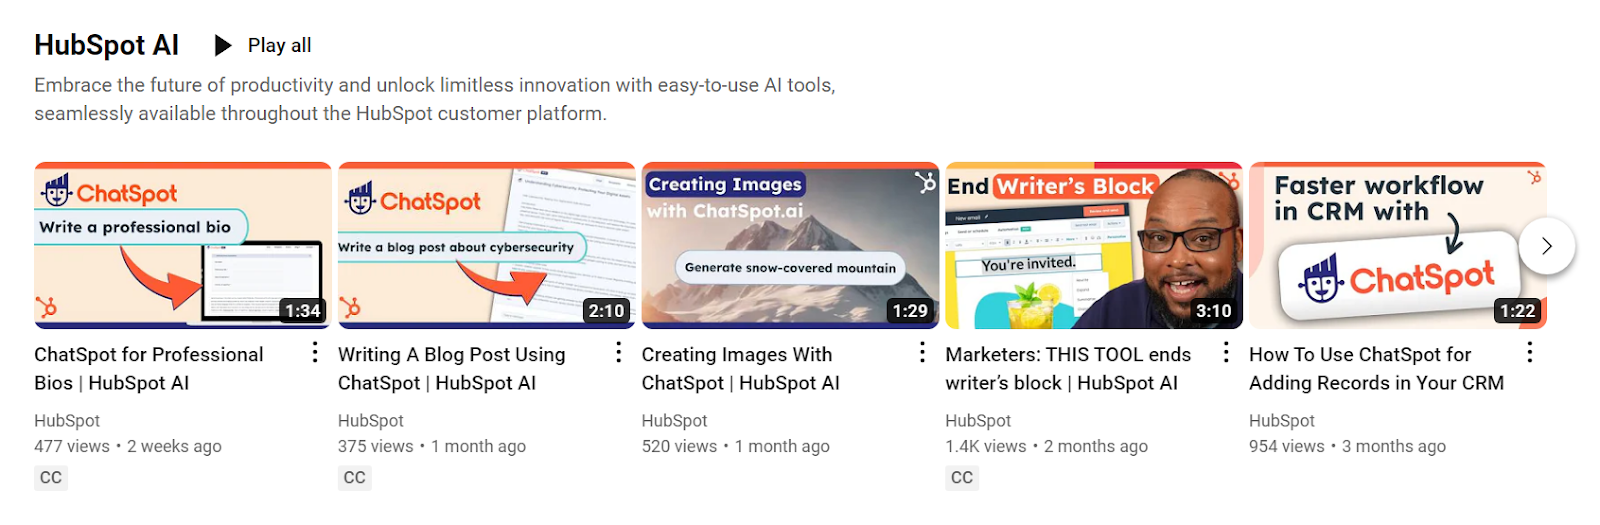 A HubSpot YouTube playlist featuring videos related to ChatSpot and their other AI in CRM tools.